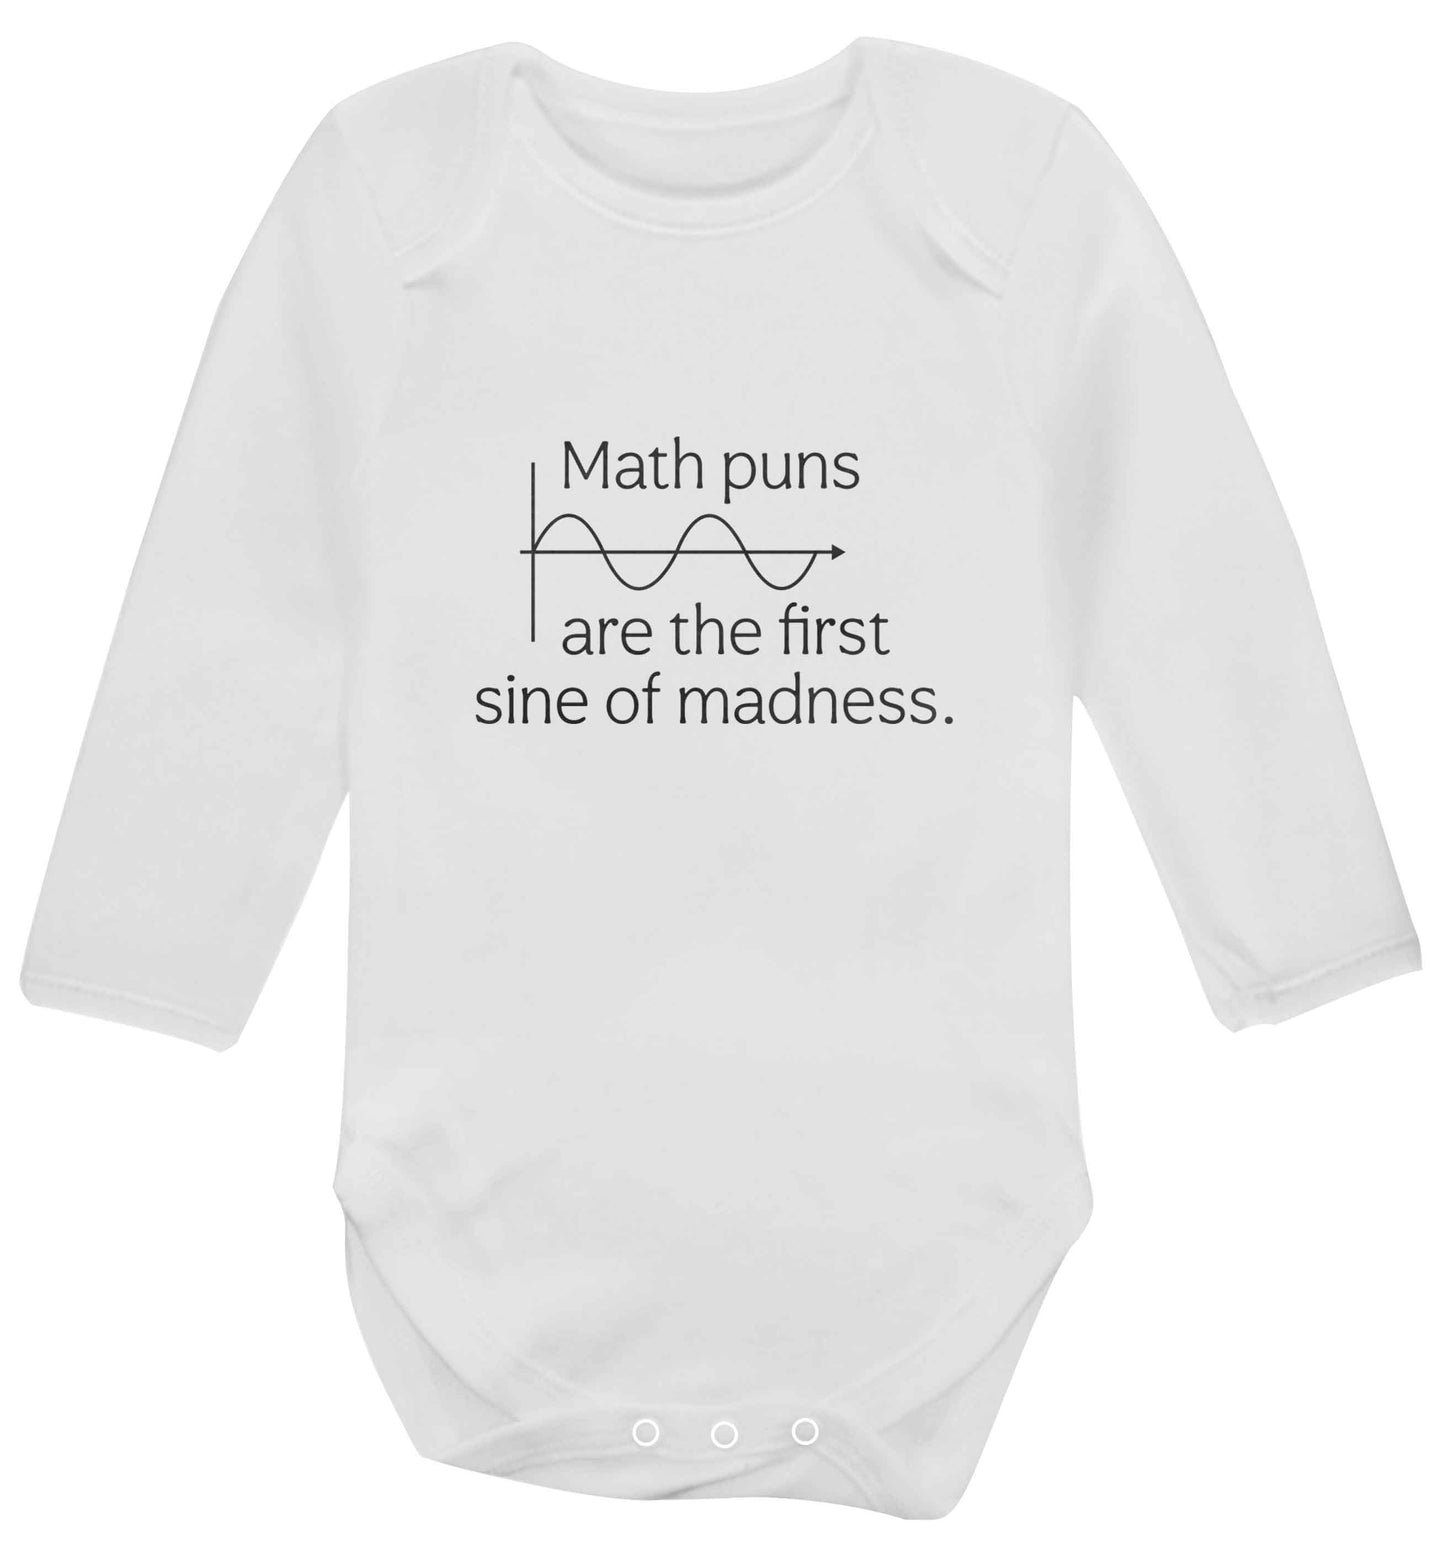 Math puns are the first sine of madness baby vest long sleeved white 6-12 months